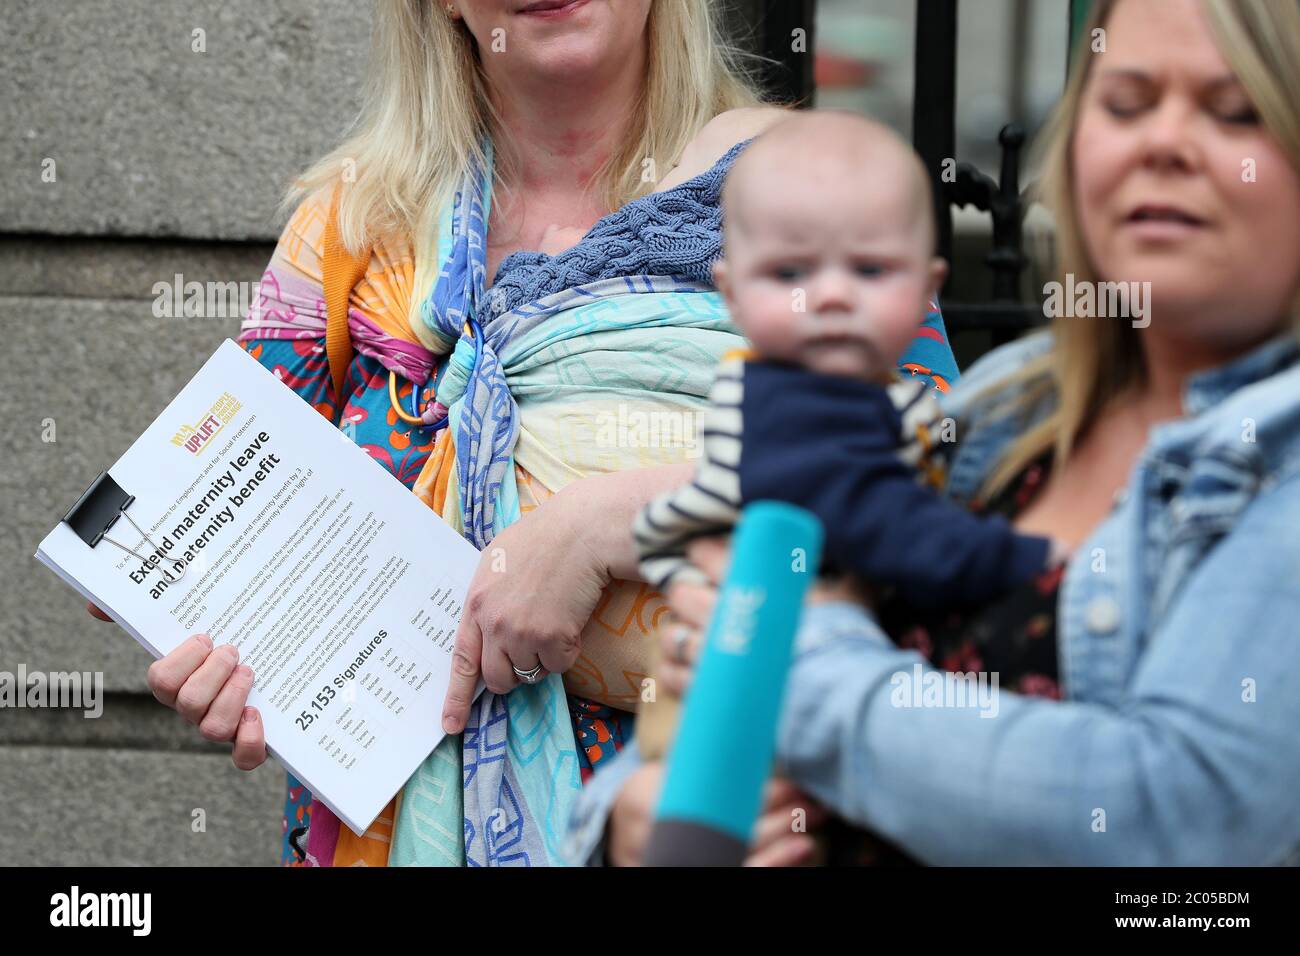 Paula Solan holds a petition for Taoiseach Leo Varadkar calling for an extension of maternity leave for 3 months due to the Covid-19 crisis at Leinster House in Dublin. Stock Photo